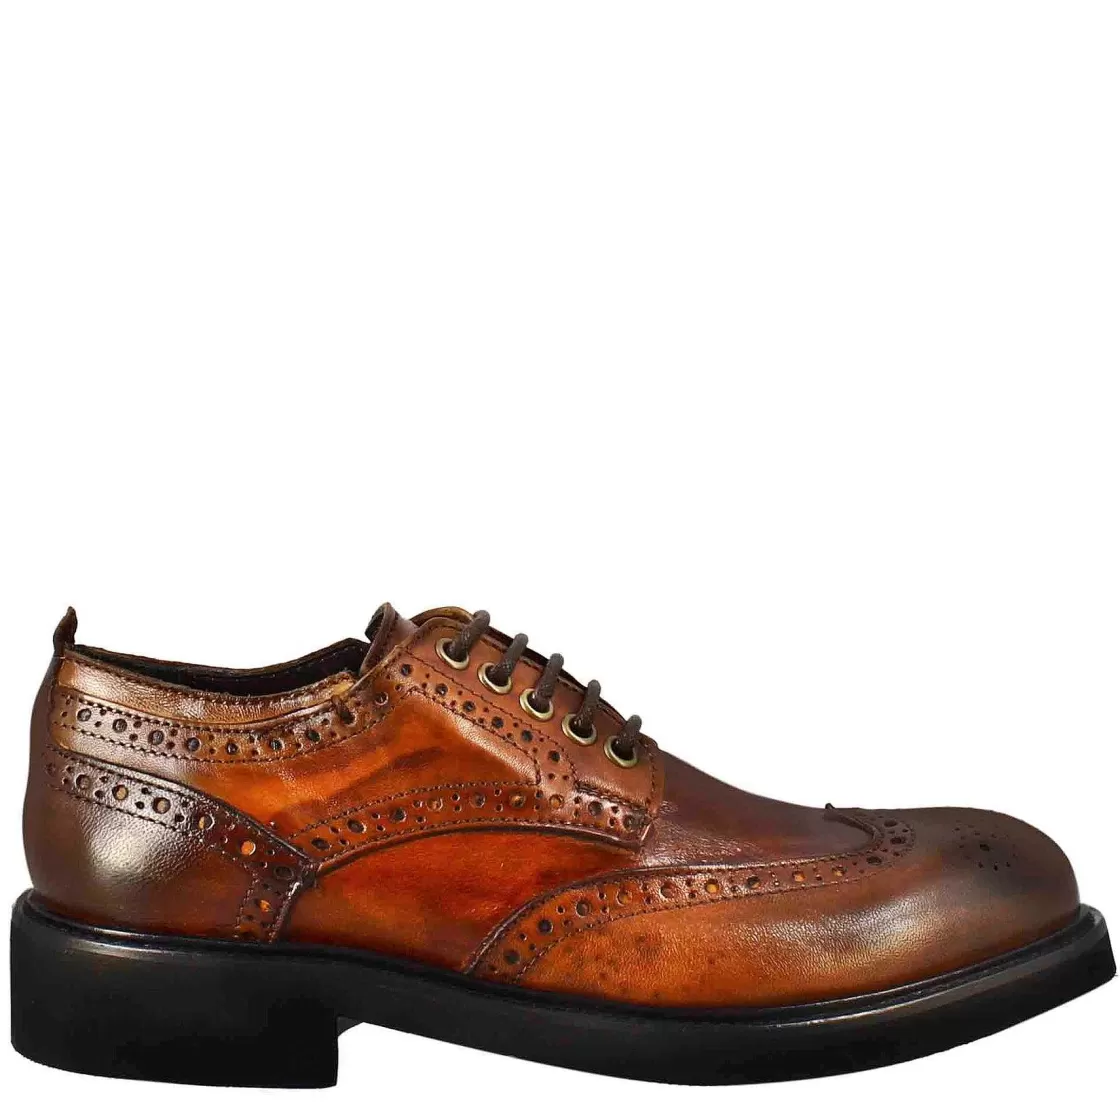 Leonardo Women'S Derby With Paupa Brogue Details In Dark Tan Washed Leather Outlet